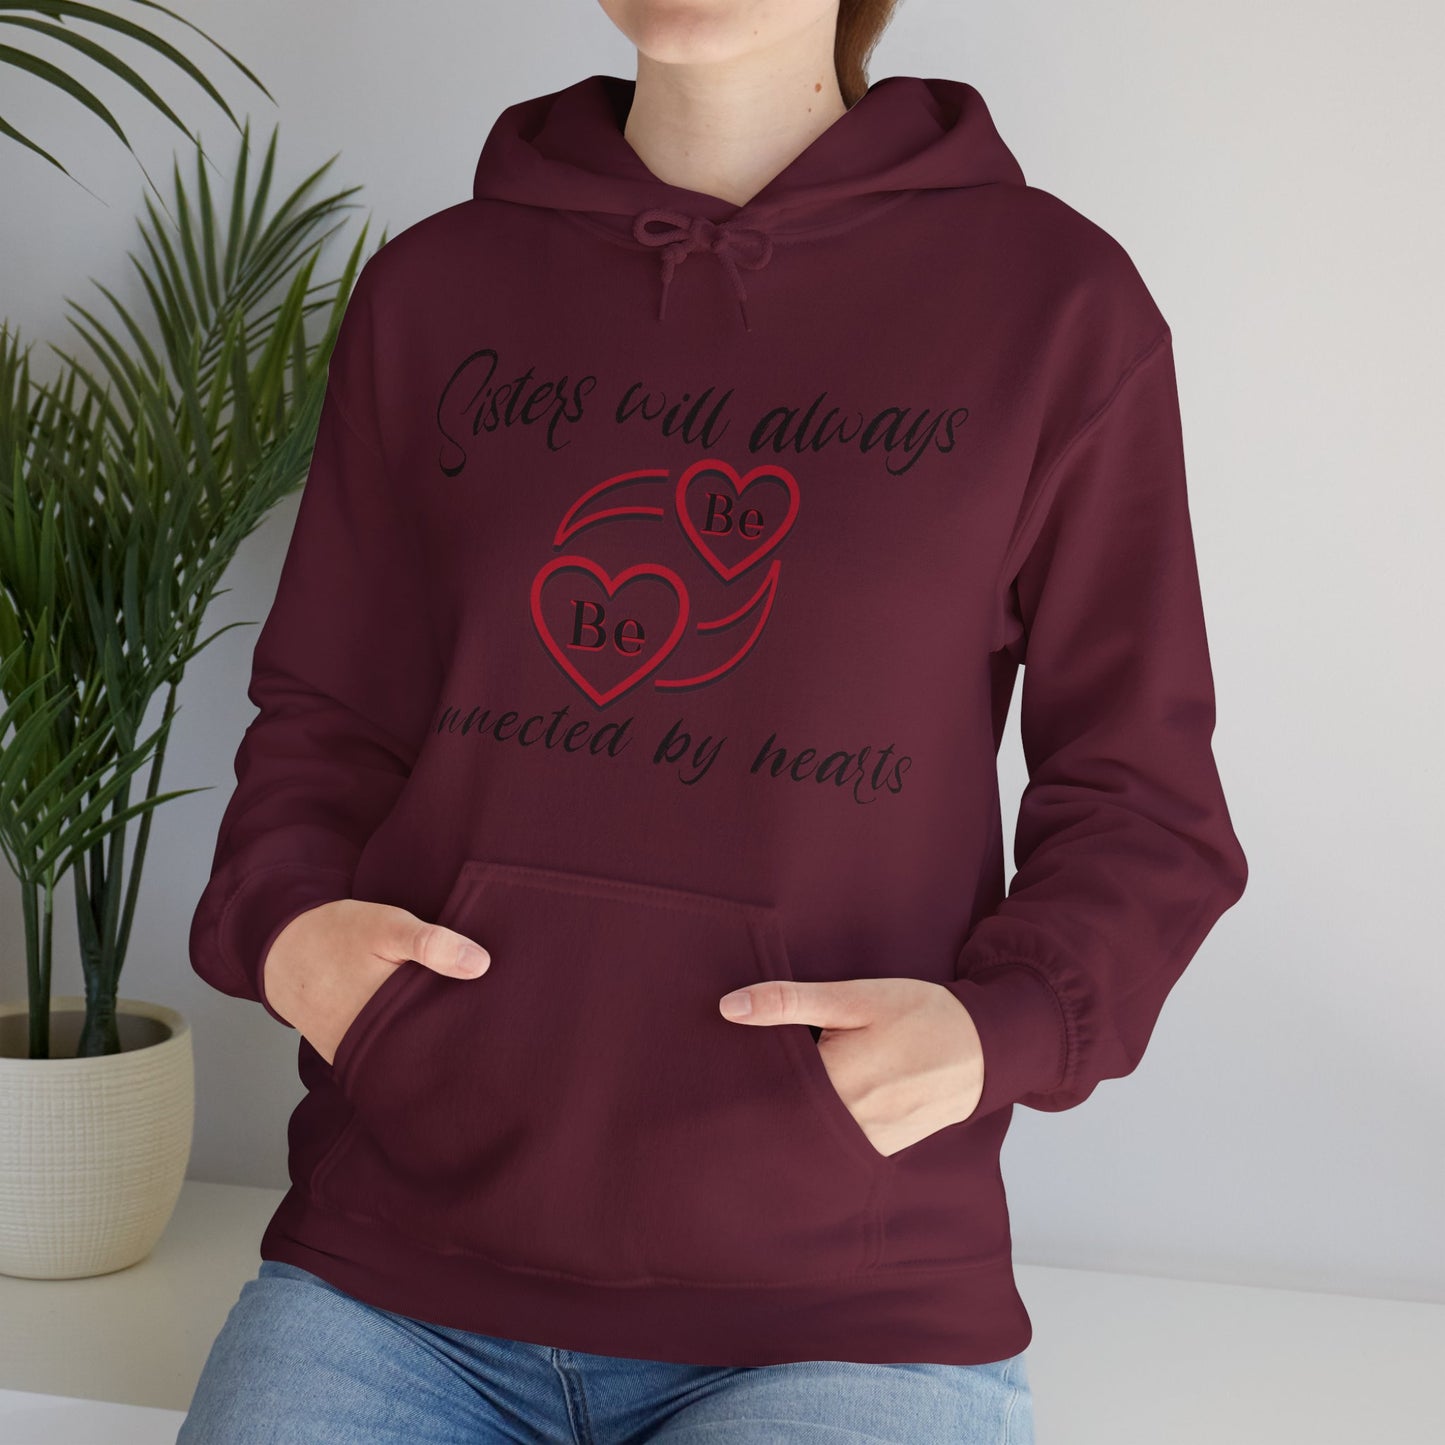 Sisters will always be connected by hearts - Unisex Heavy Blend™ Hooded Sweatshirt